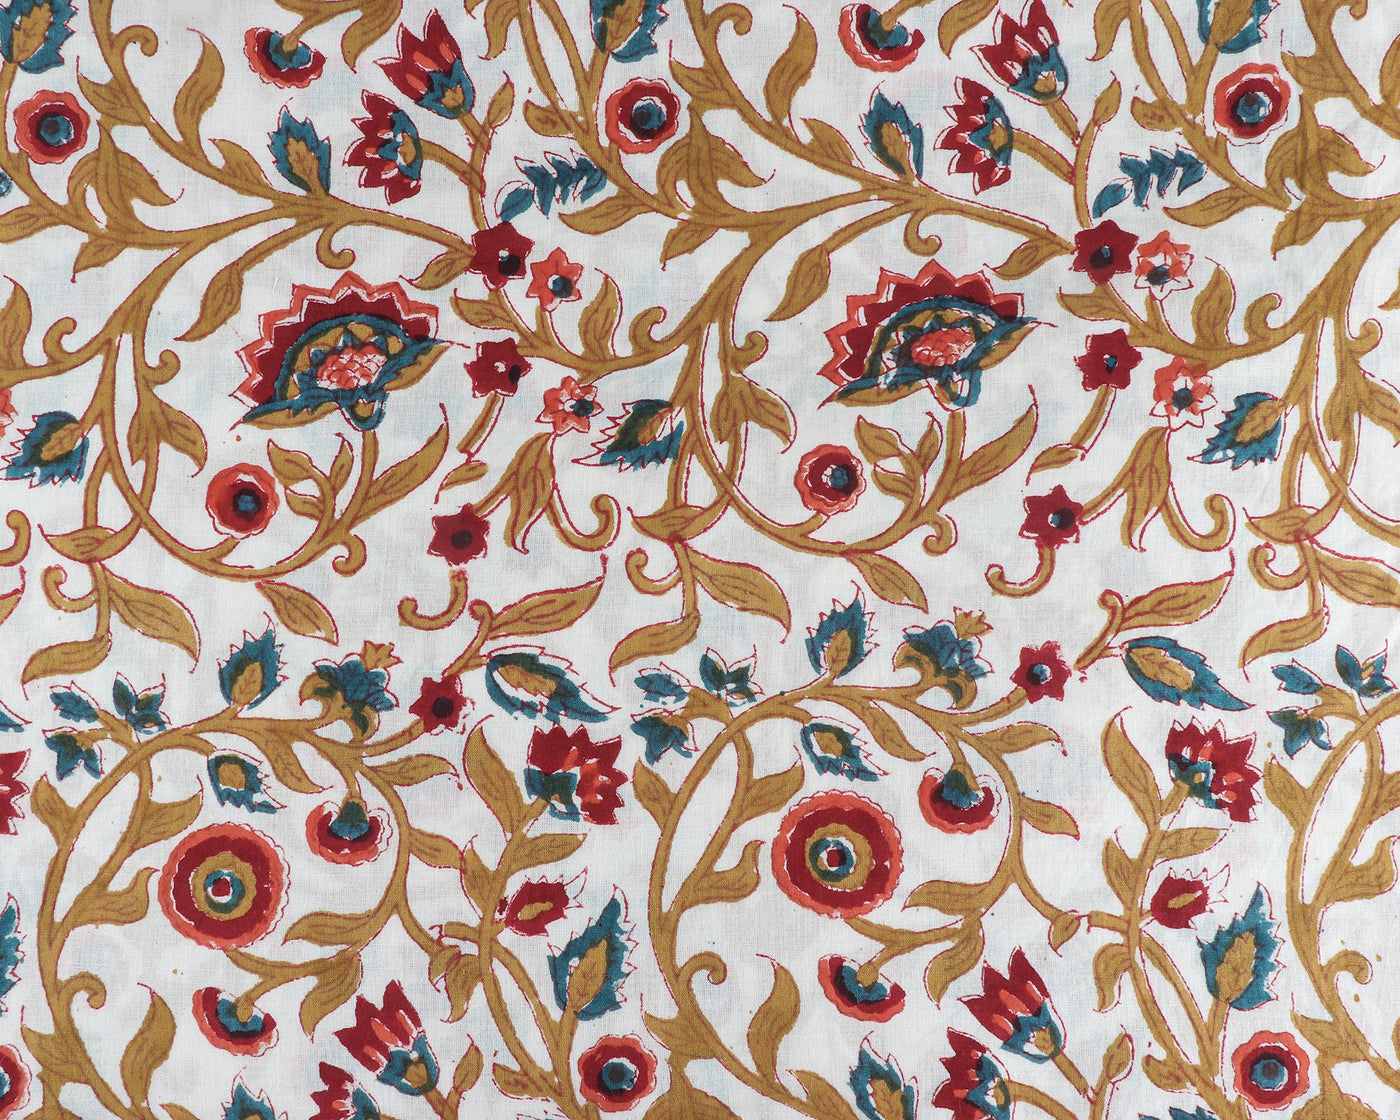 Sangria Red, Dijon Yellow, Yale Blue Indian Floral Hand Block Printed 100% Pure Cotton Cloth, Fabric by the yard, Women's Clothing Curtains